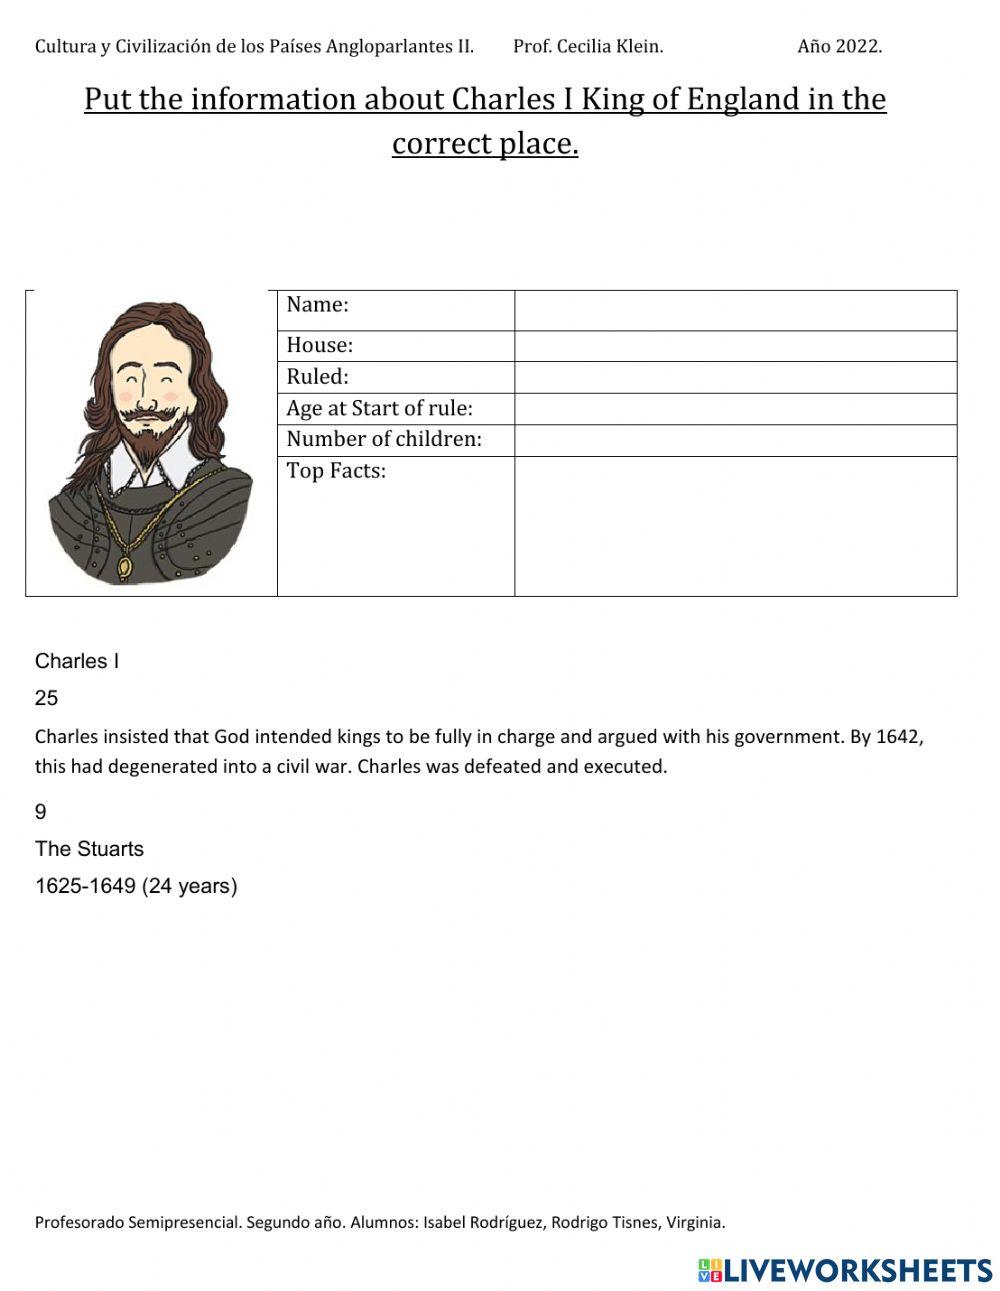 Charles I top facts